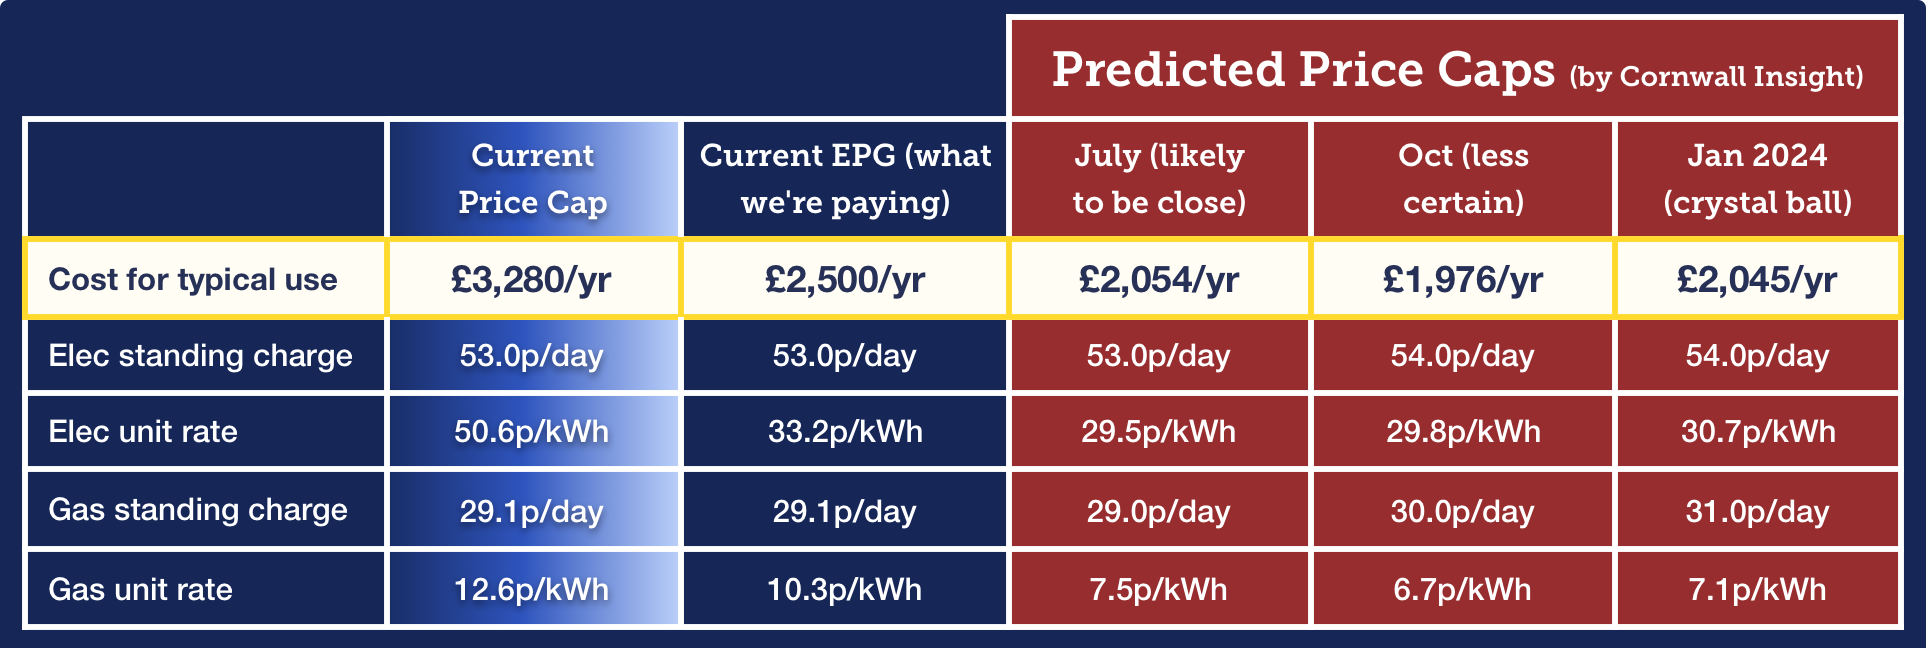 A table showing Cornwall Insight's predicted Price Cap levels and the current and predicted costs for those who use a typical amount of energy. The cost for typical use under the current Price Cap is £3,280 a year. However, we currently pay the lower Energy Price Guarantee, with typical costs of £2,500 a year. This is set to fall, under the Price Cap, to around £2,054 a year in July, £1,976 a year in October, then back up to £2,045 a year in January 2024. Now for a breakdown of unit-rate and standing-charge costs in finer detail: The standing charge for electricity is 53p a day under the current Price Cap and Price Guarantee. This standing charge is forecast to remain at 53p in July, before rising to 54p in October and January. The unit rate of electricity per kilowatt hour is 50.6p under the current Price Cap and 33.2p under the current Price Guarantee (we currently pay the second of these two rates). The electricity unit rate under the Price Cap is forecast to move to 29.5p in July, 29.8p in October and 30.7p in January. The standing charge for gas is currently 29.1p a day under both the Price Cap and the Price Guarantee. The Price Cap standing charge is forecast to move to 29p in July, 30p in October and 31p in January. The unit rate of gas per kilowatt hour is 12.6p under the current Price Cap and 10.3p under the current Price Guarantee (we currently pay the second of these two rates). The Price Cap gas rate is forecast to move to 7.5p in July, 6.7p in October and 7.1p in January. 